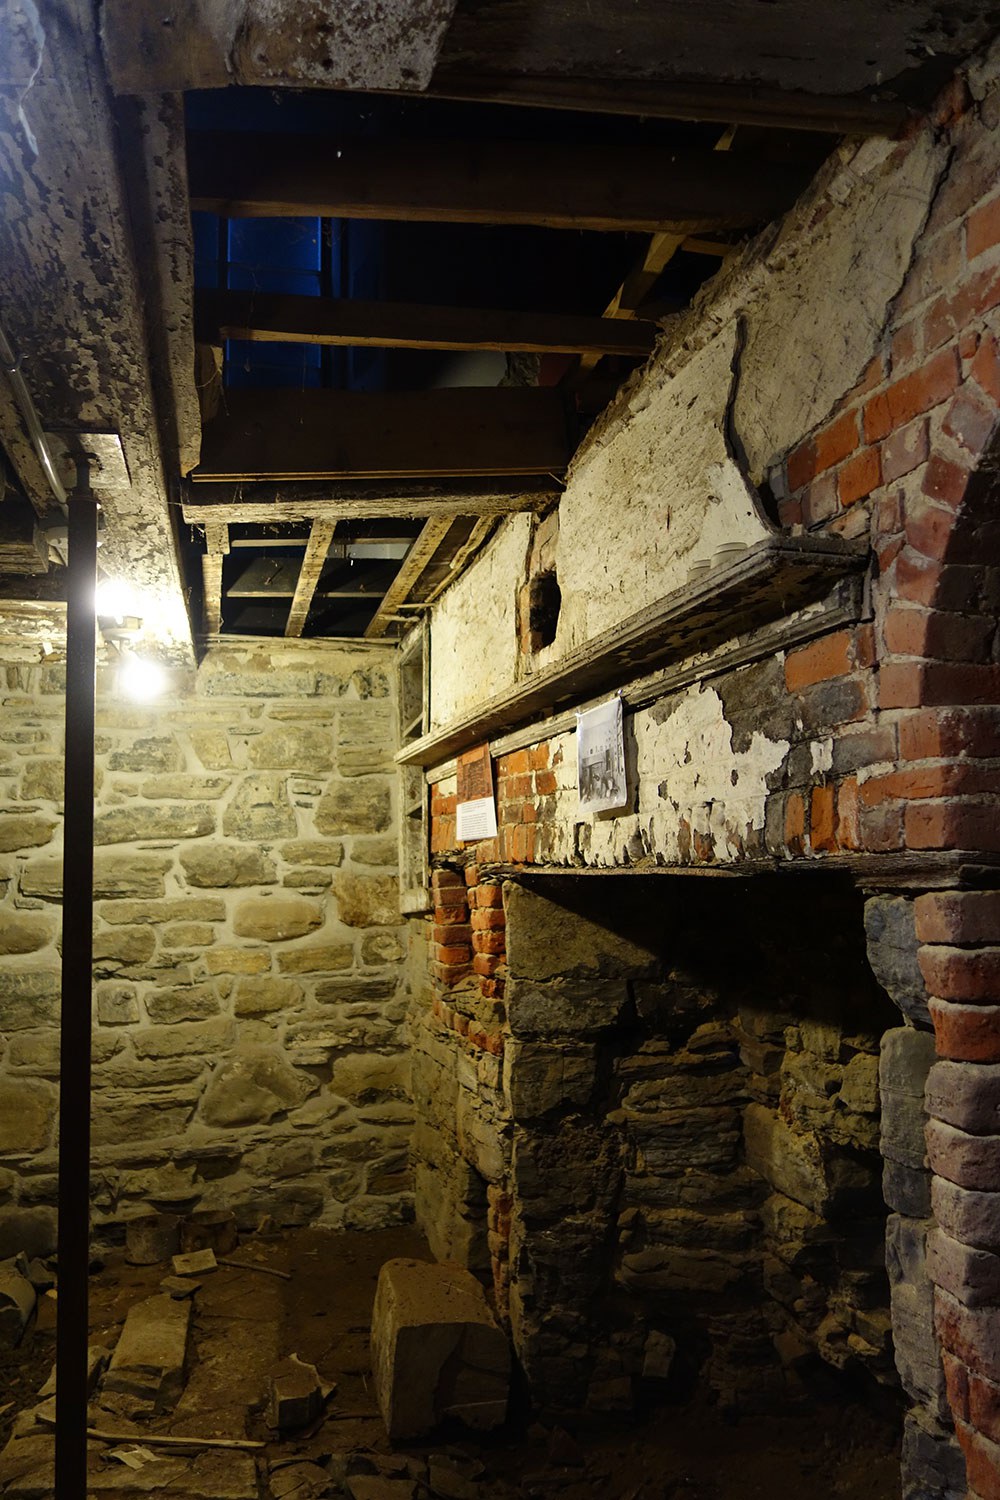 The basement bake-oven and open hearth, preserved as an architectural ruin